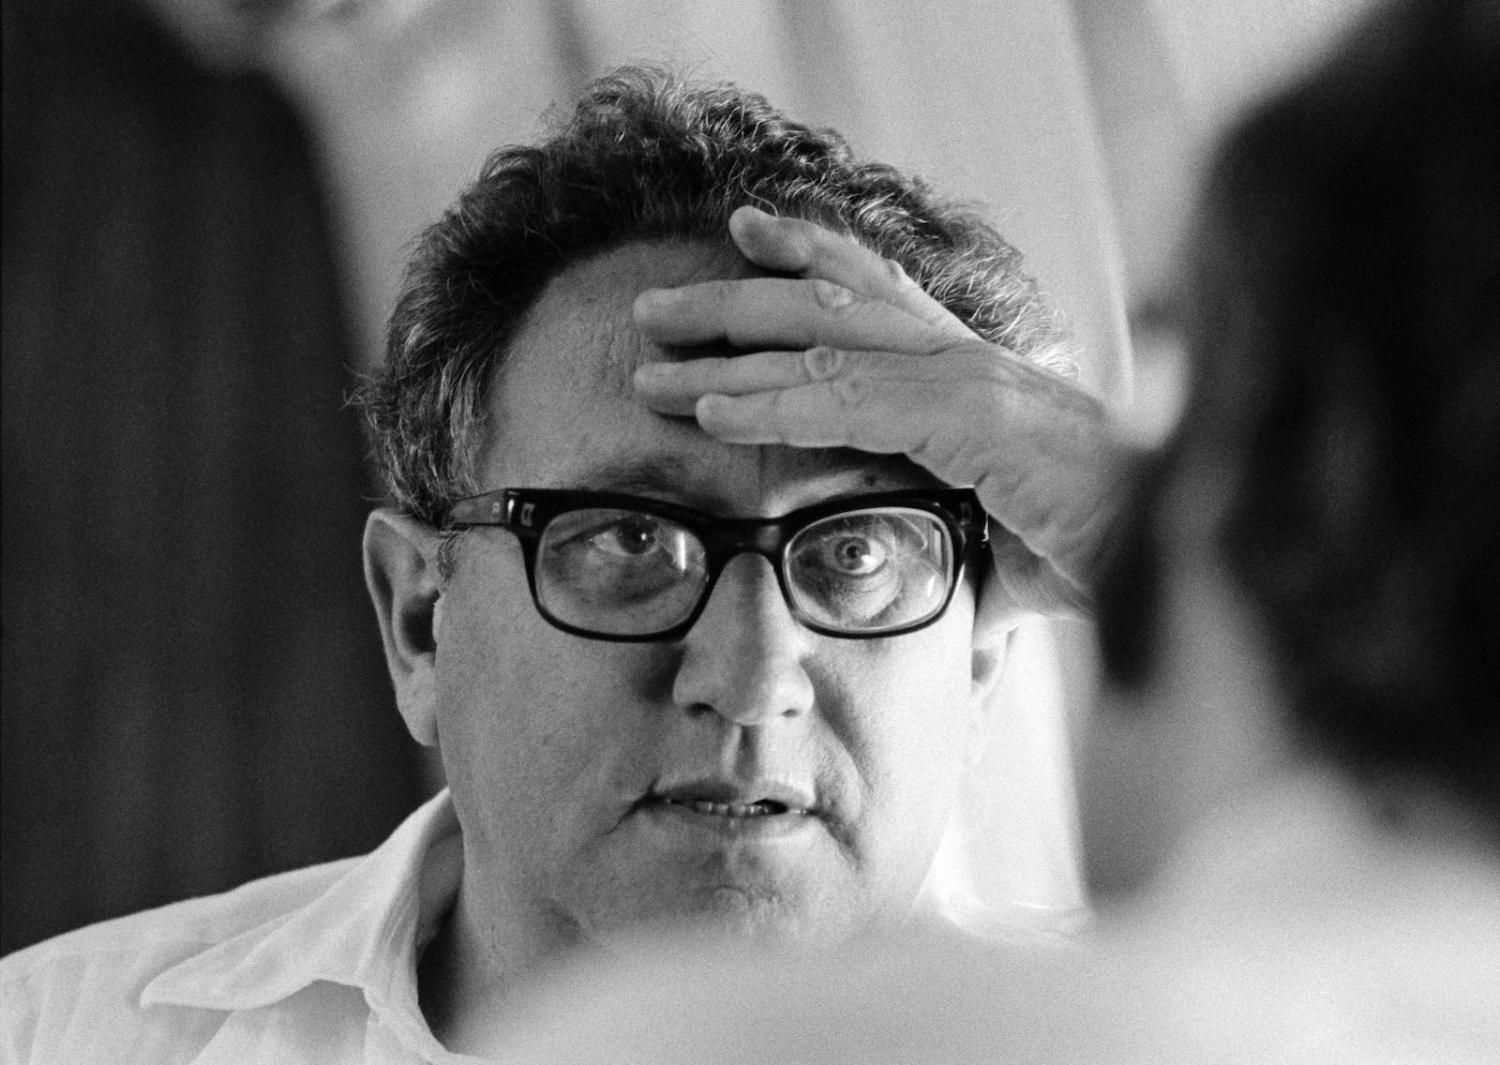 US Secretary of State Henry Kissinger en route from Egypt to Israel on 27 September 1975 during negotiations over the return of Sinai to Egypt (David Hume Kennerly/Getty Images)